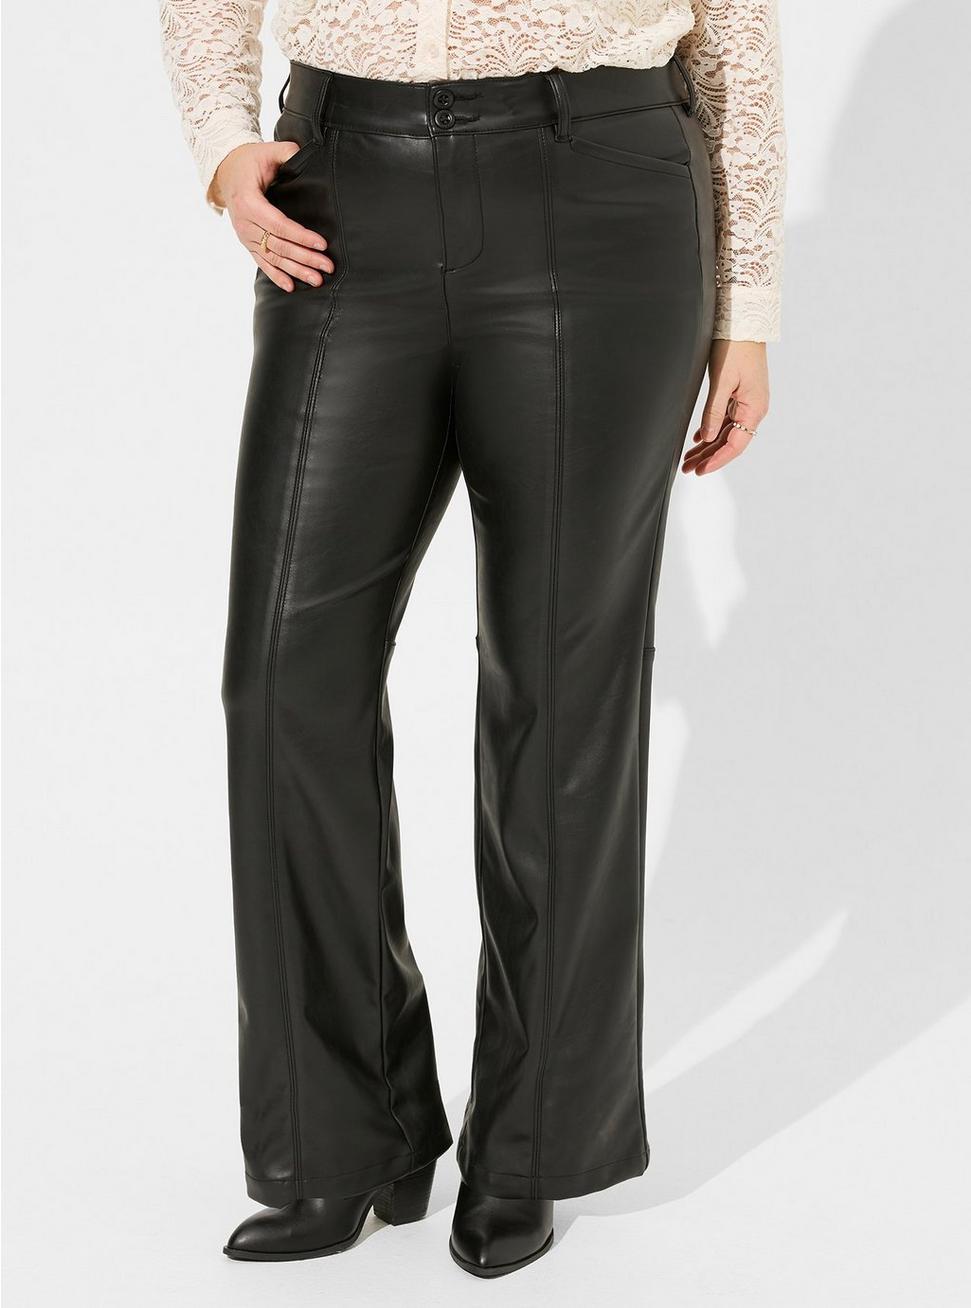 Plus Size - Pintuck Trouser Boot Faux Leather High Rise Pant - Torrid